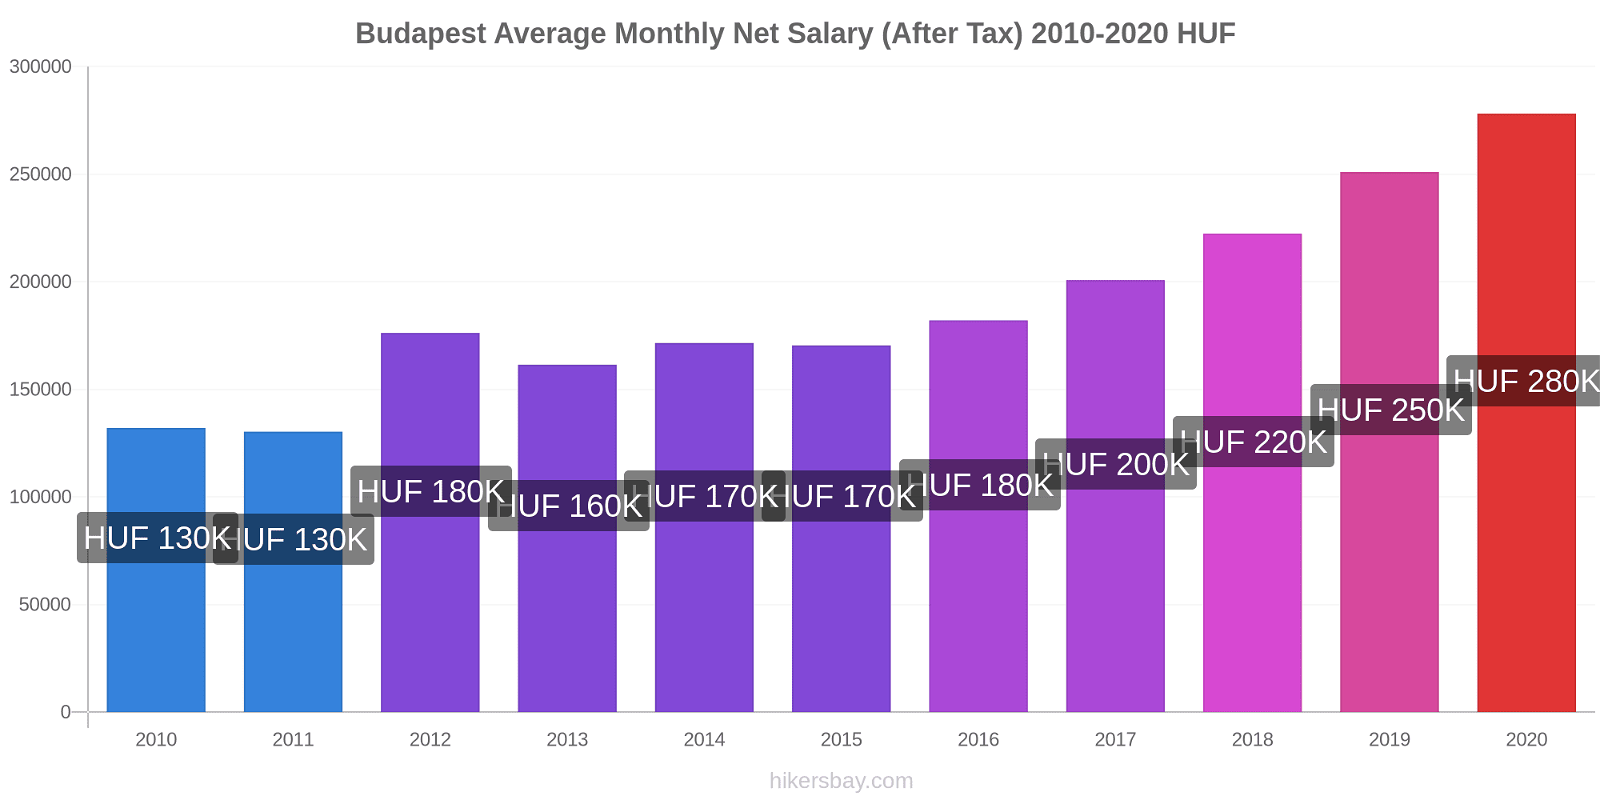 Budapest price changes Average Monthly Net Salary (After Tax) hikersbay.com